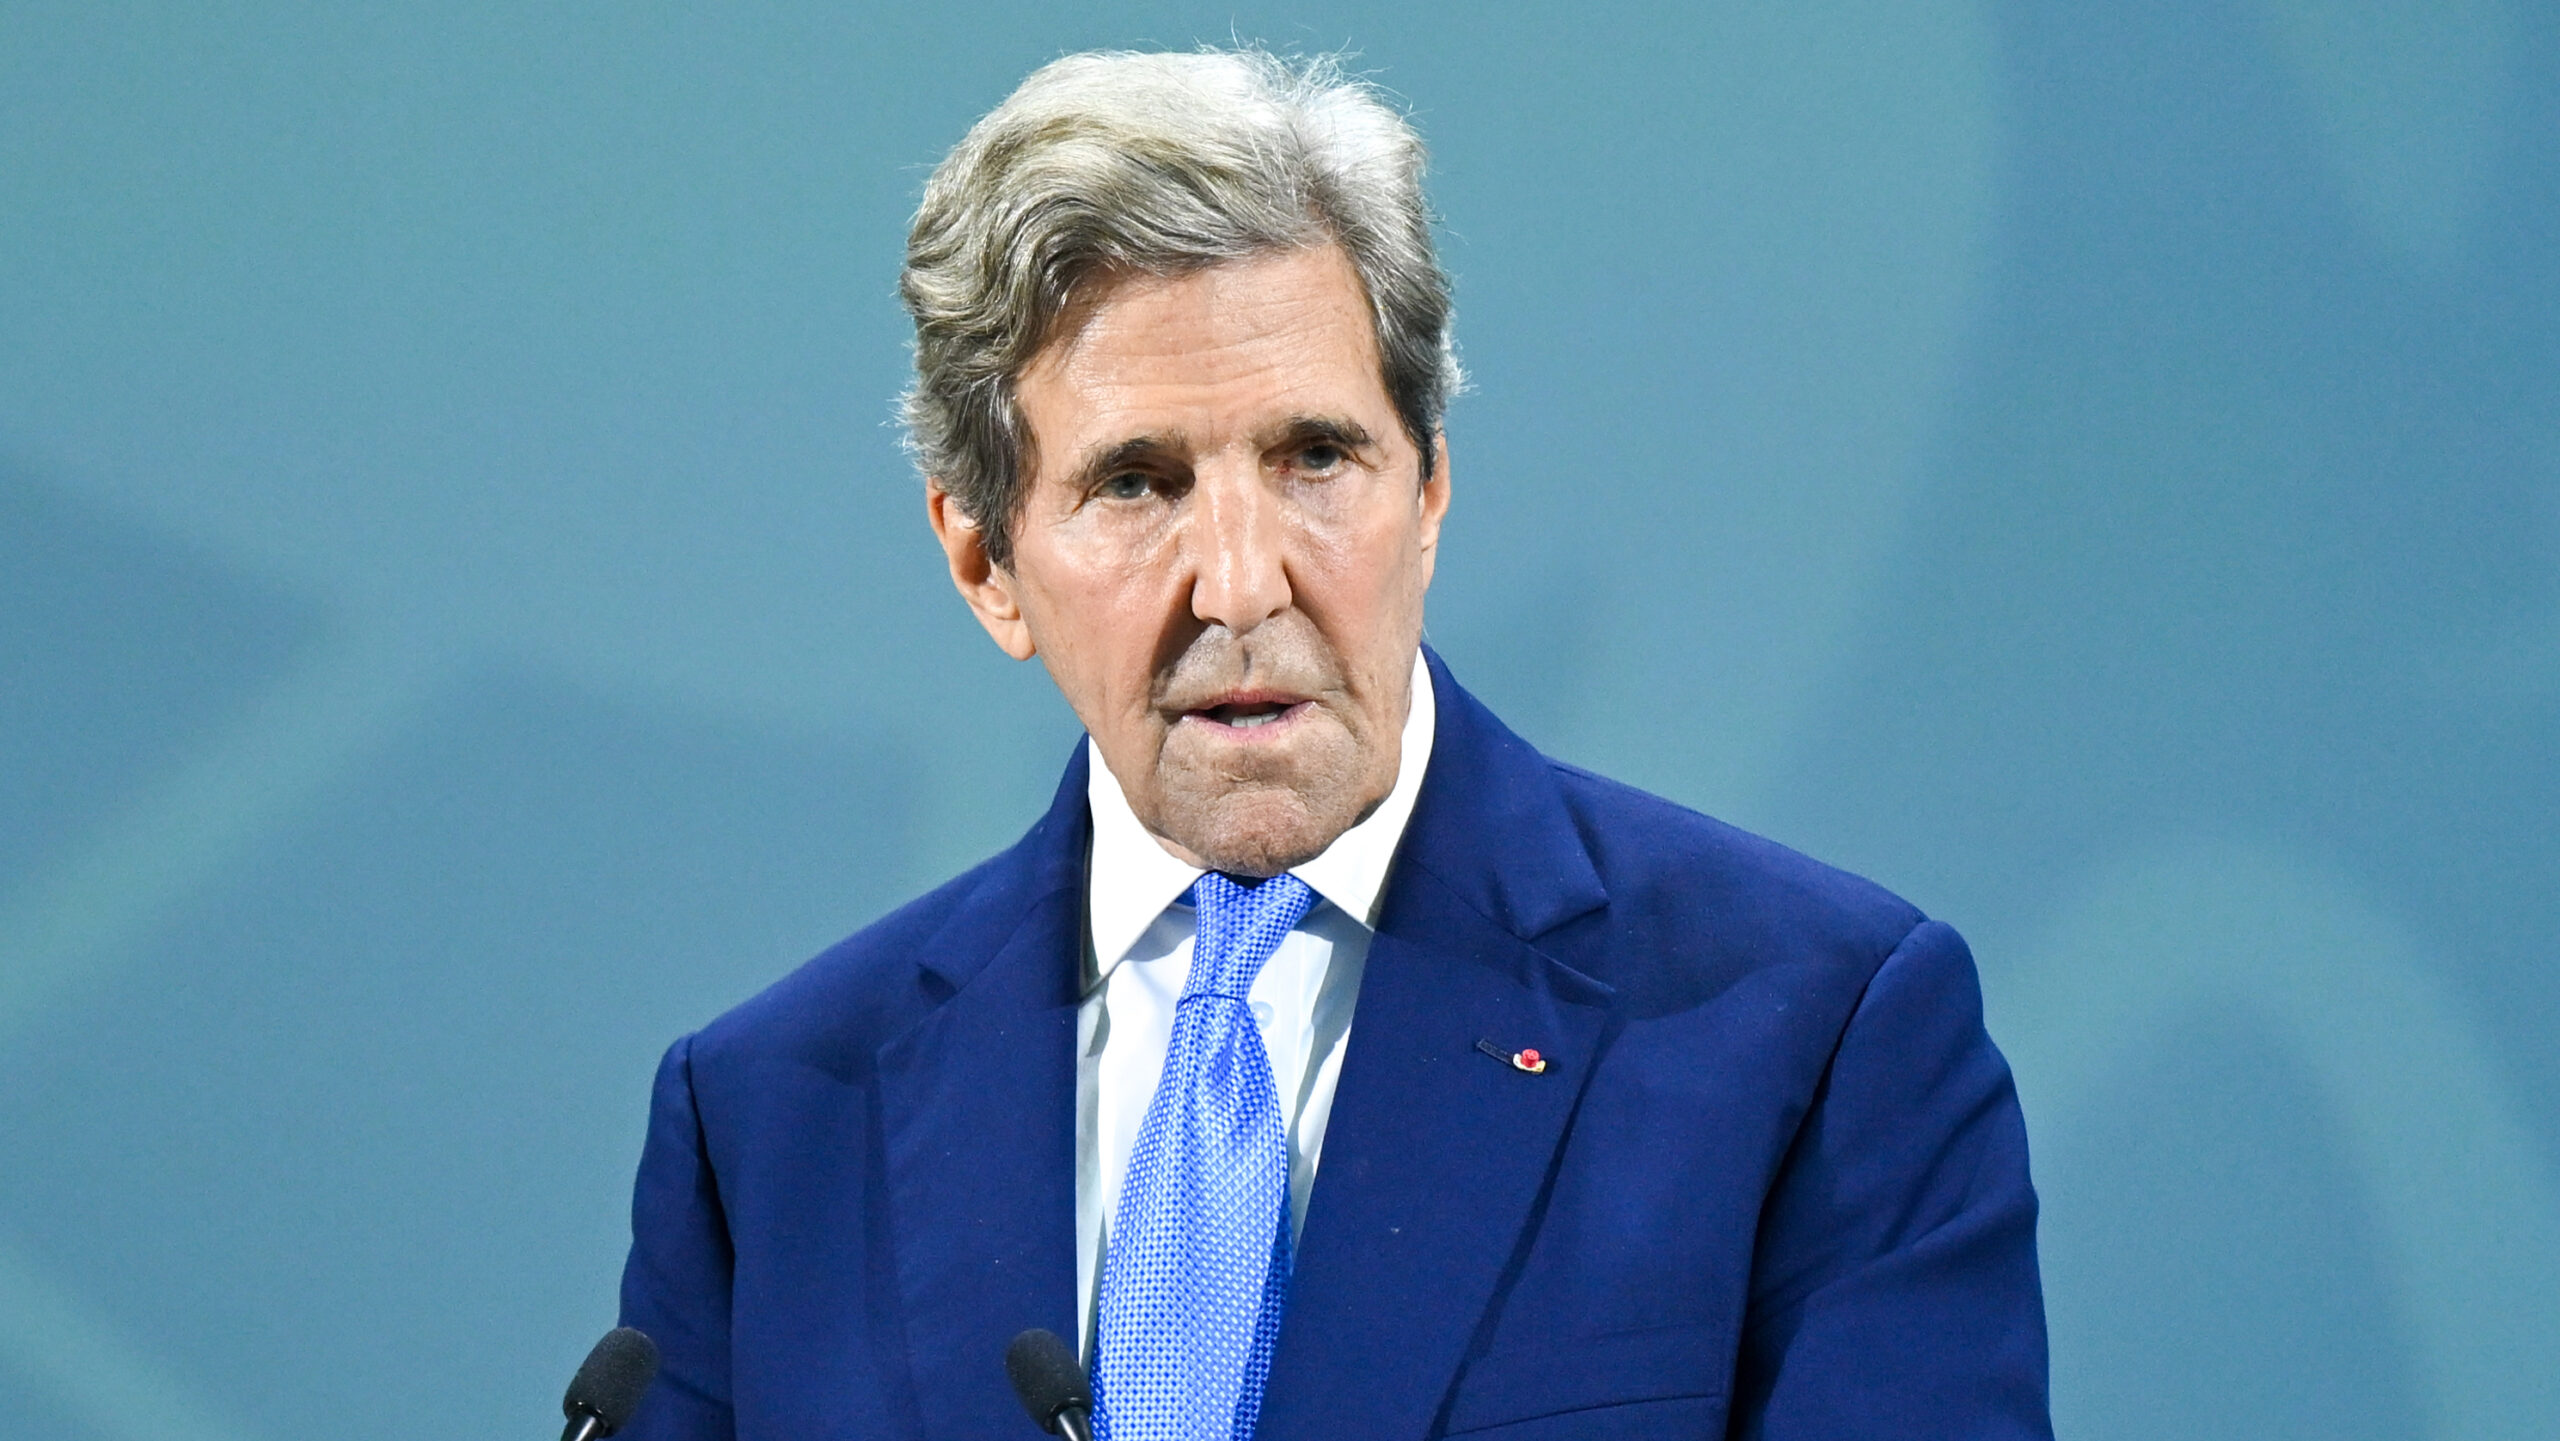 Climate Czar John Kerry: Russia-Ukraine tensions eased if emissions reduced